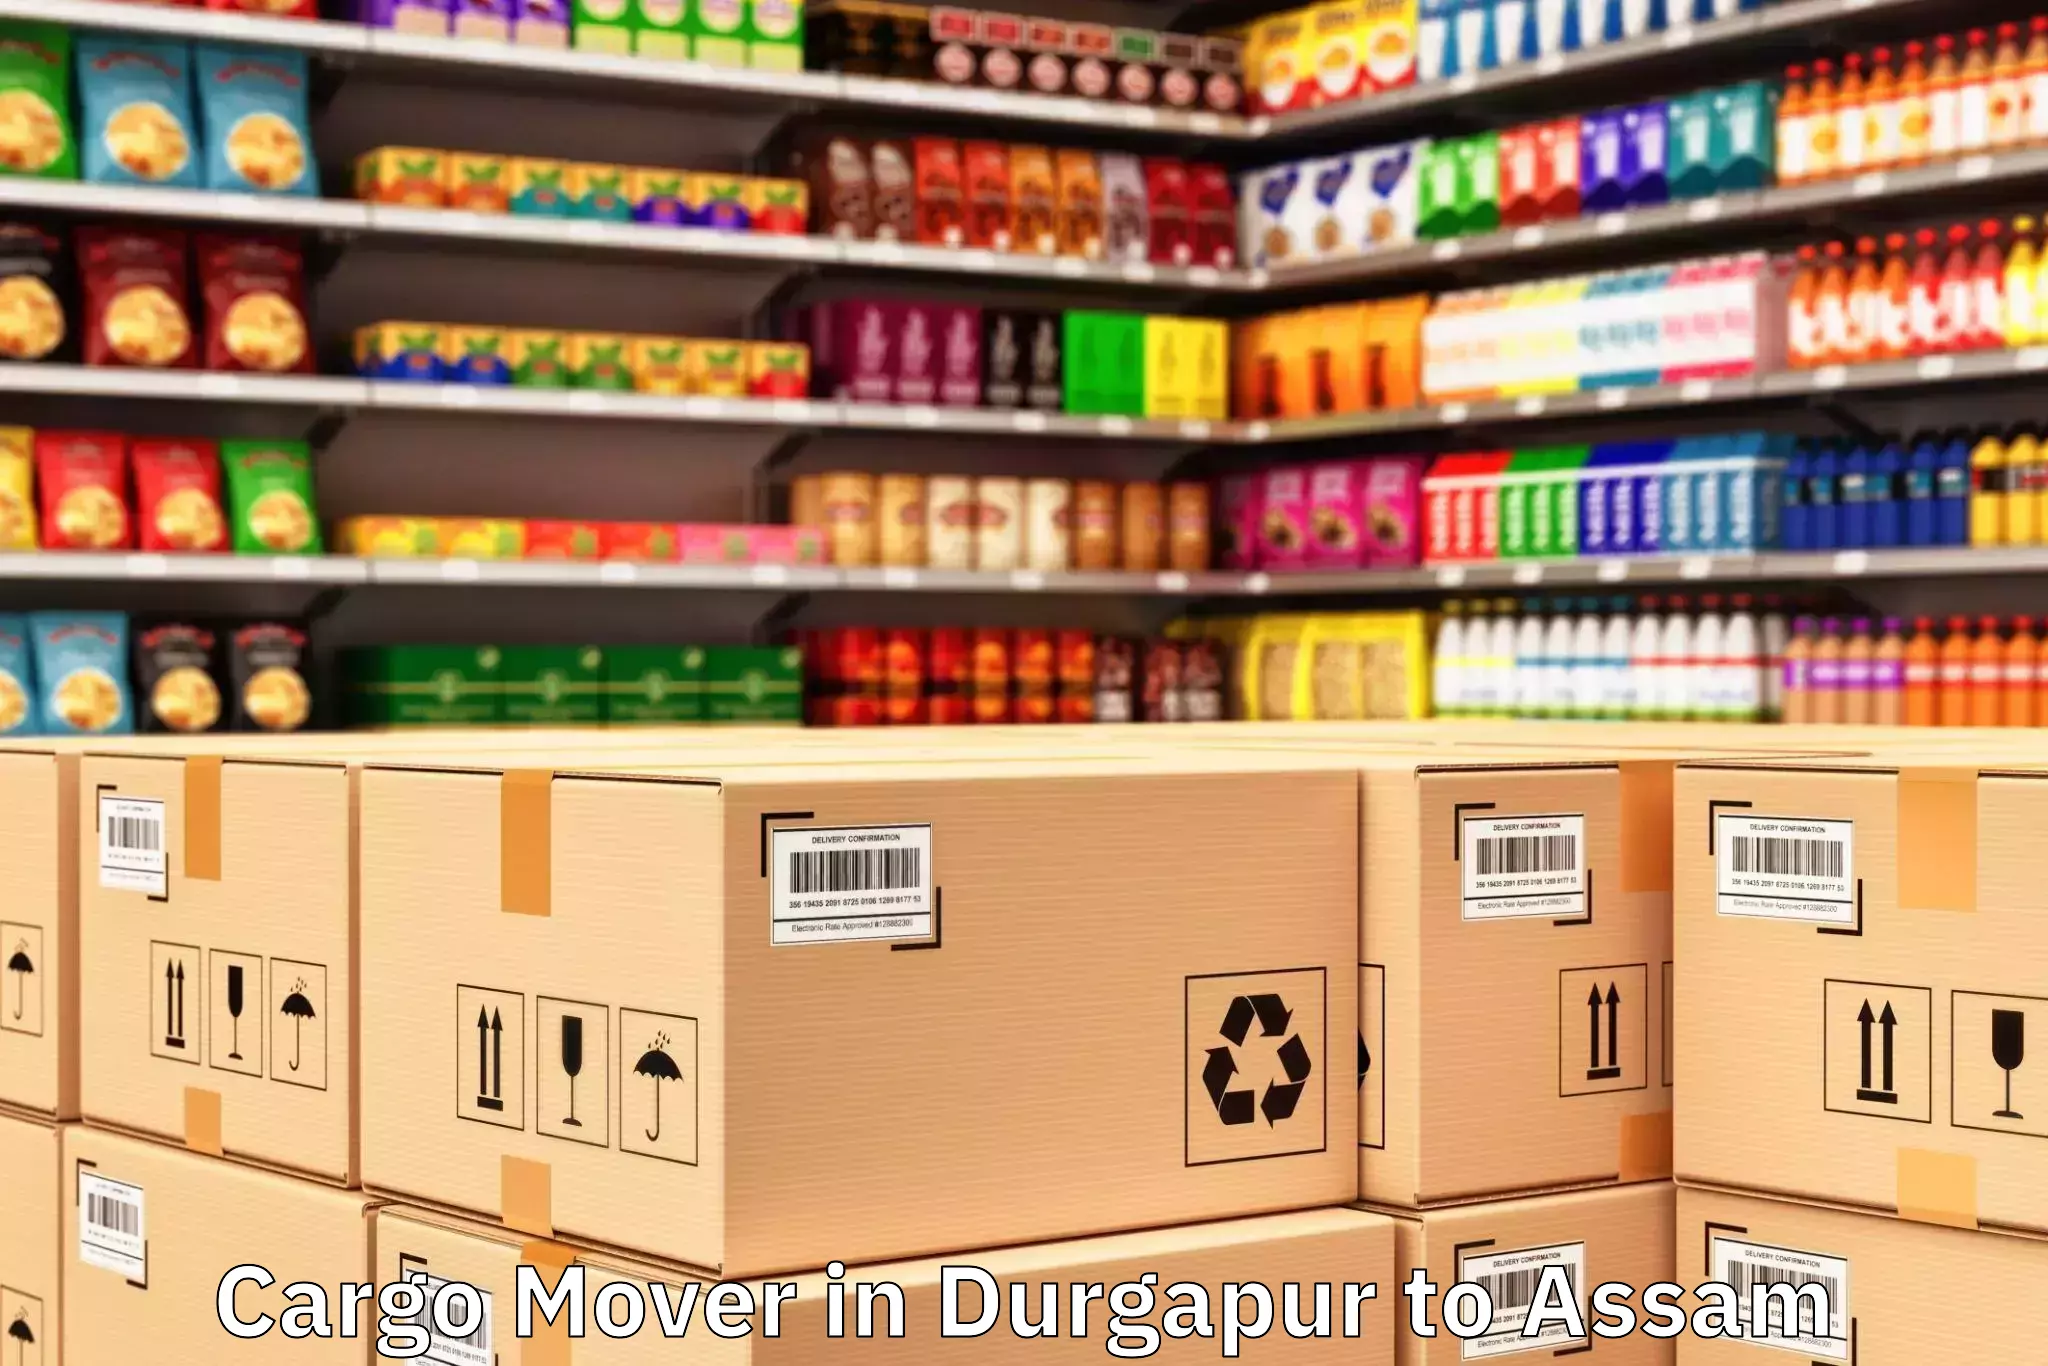 Top Durgapur to Nowgong Cargo Mover Available